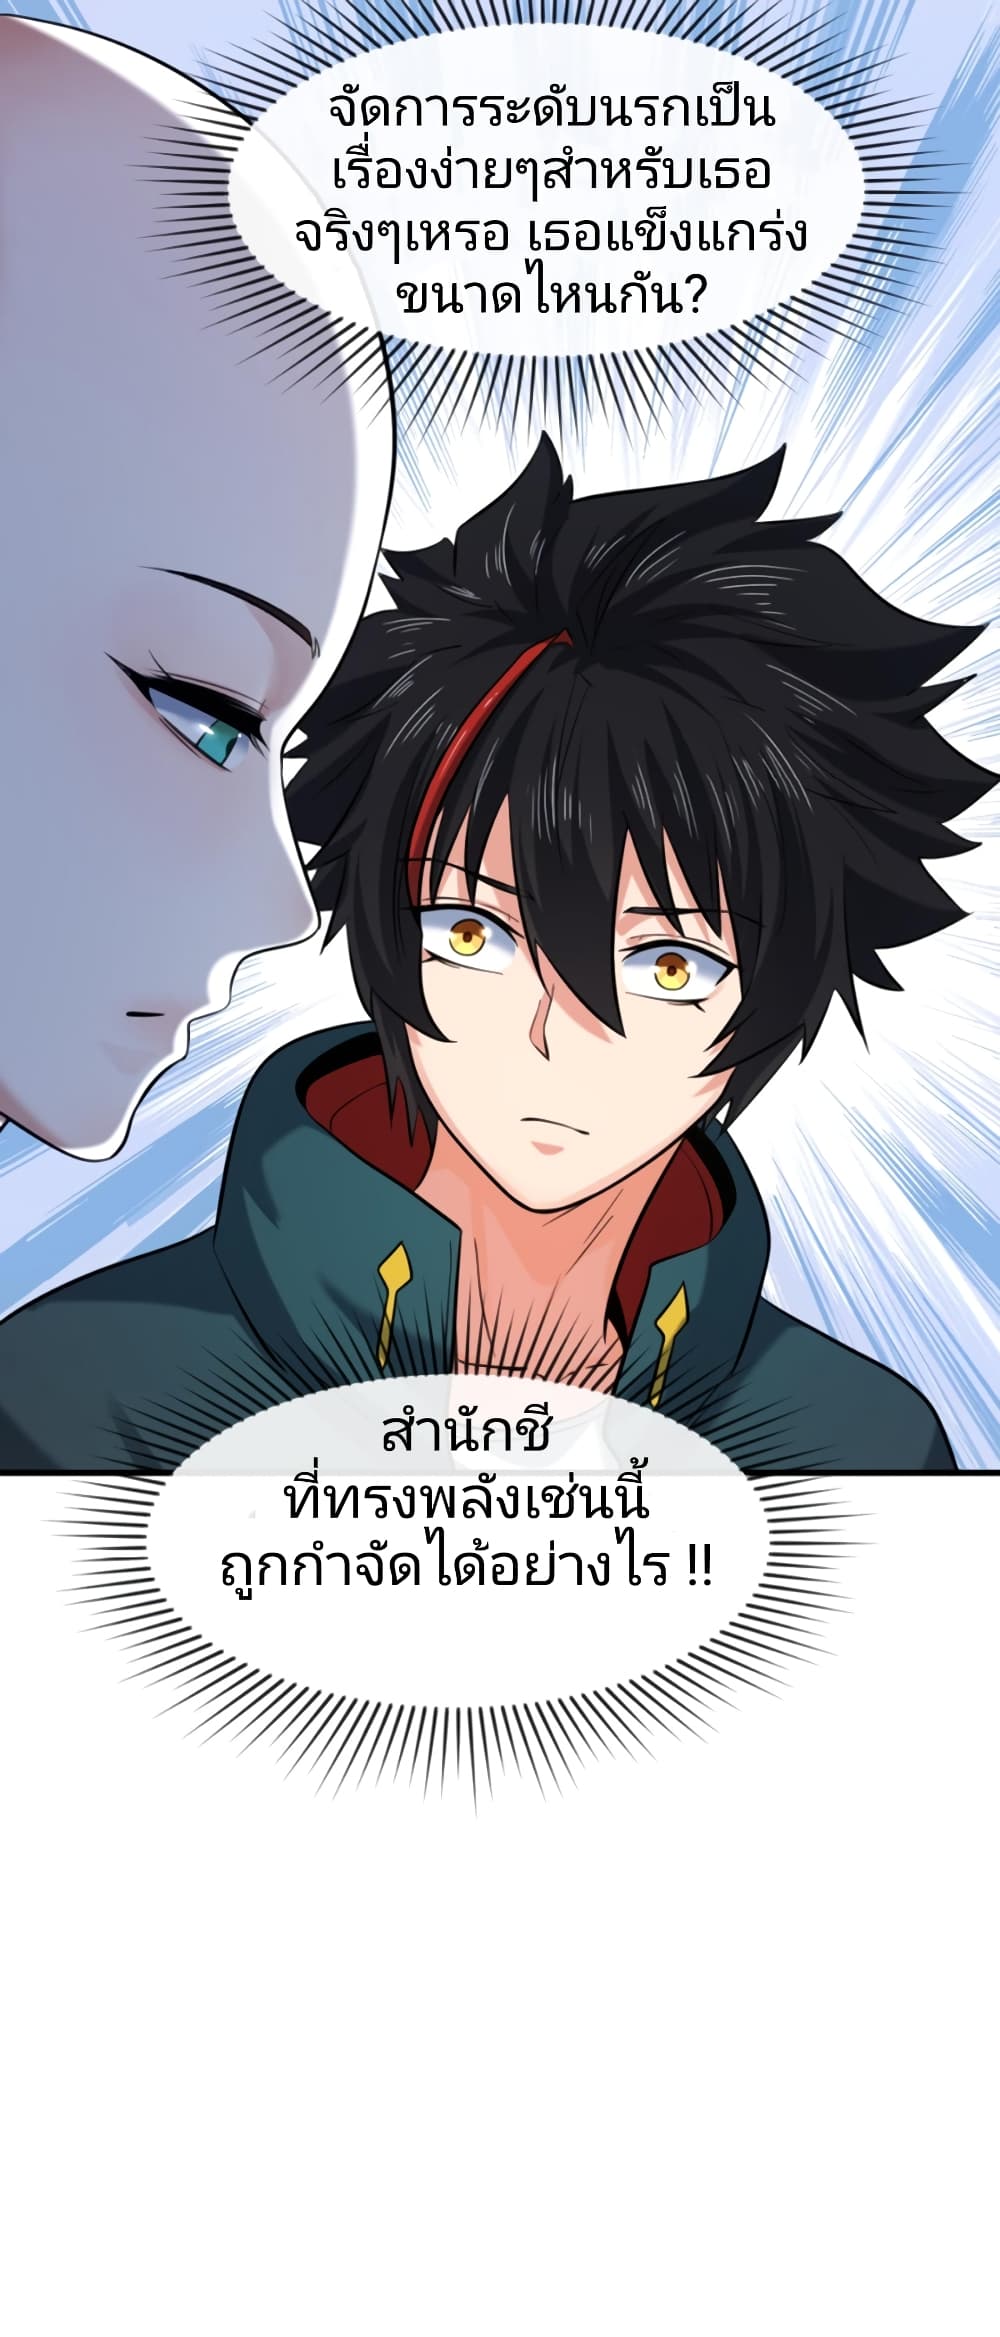 The Age of Ghost Spirits à¸à¸­à¸à¸à¸µà¹ 44 (32)